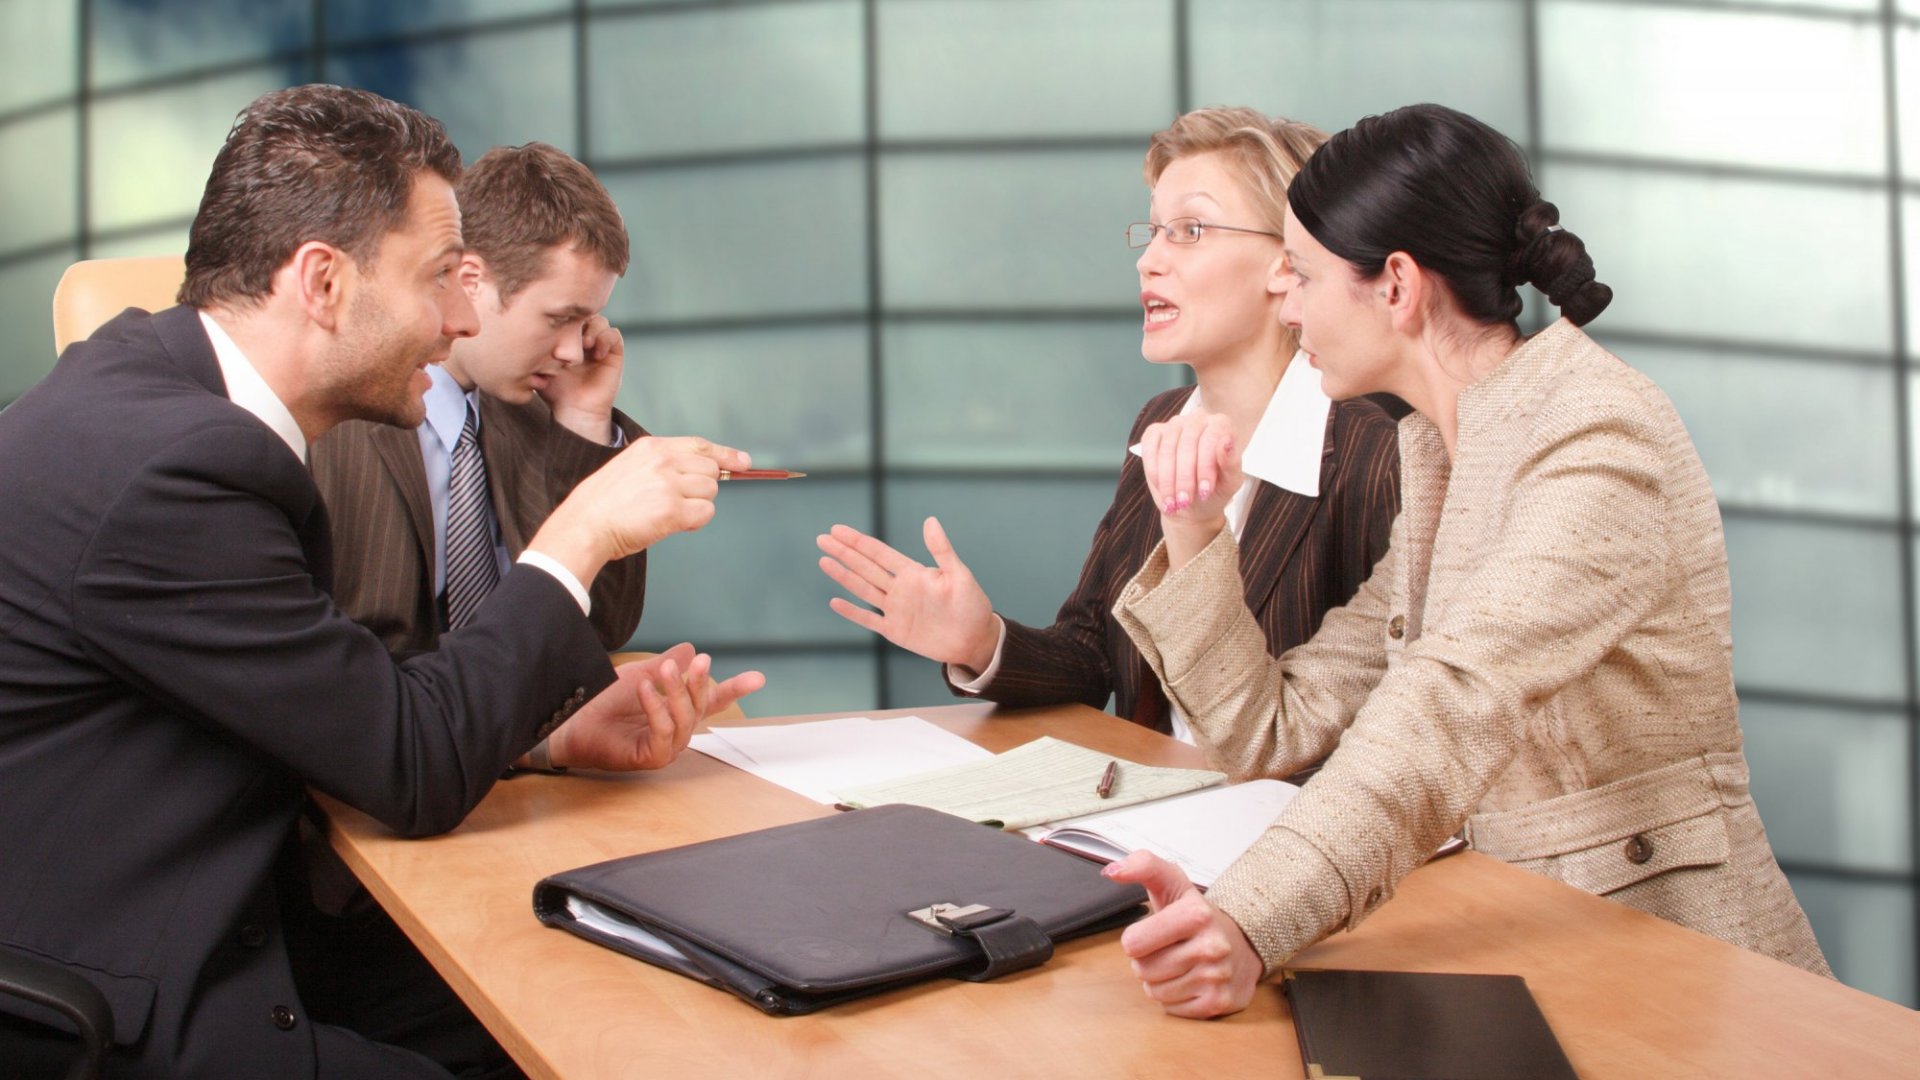 Top 10 tips how to deal with difficult people at work